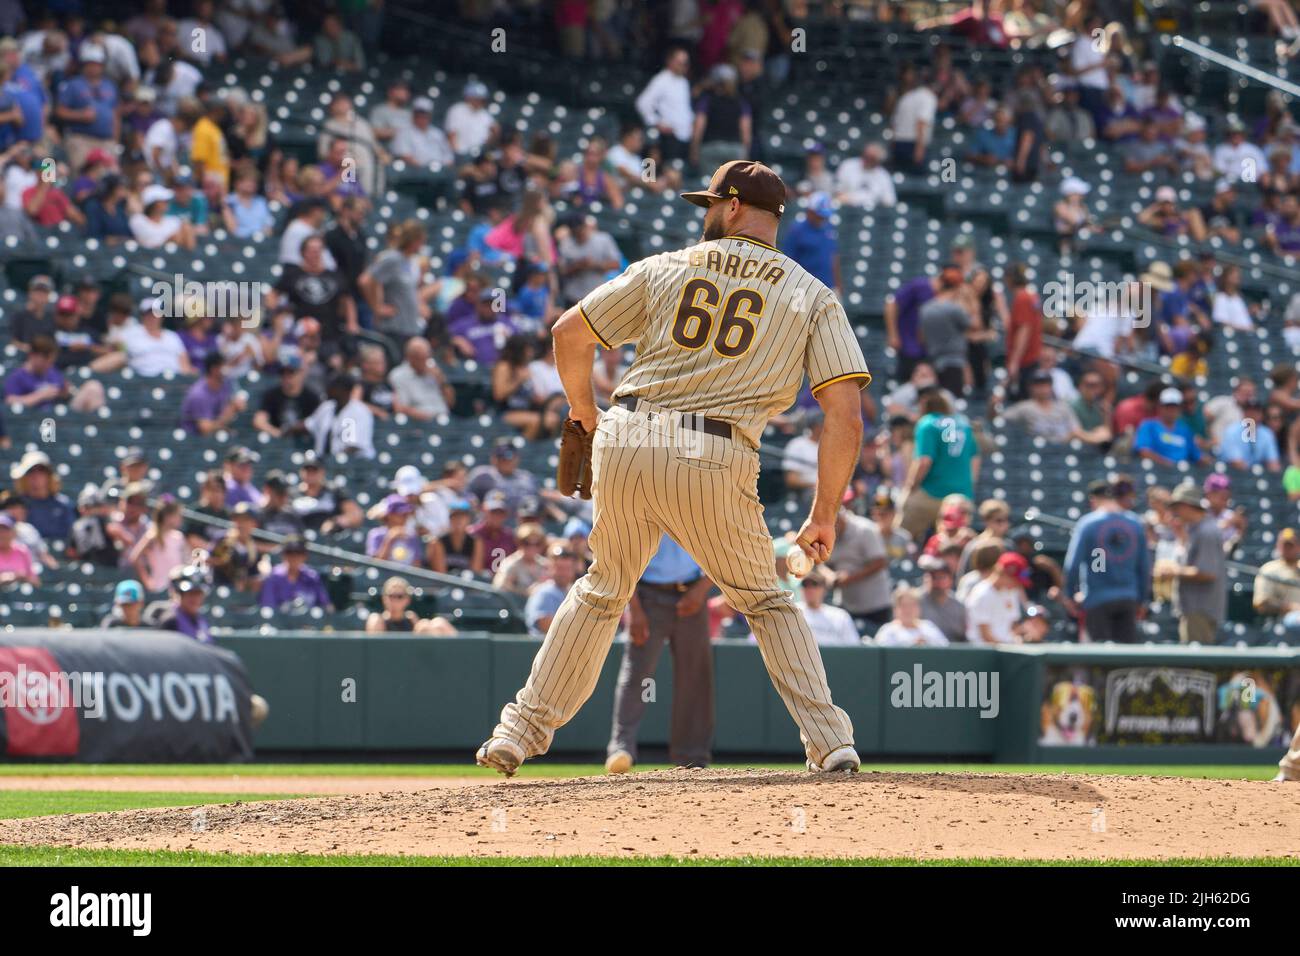 Denver CO, USA. 14th July, 2022. San Diego pitcher Luis Garcia (66) throws a pitch during the game with San Diego Padres and Colorado Rockies held at Coors Field in Denver Co. David Seelig/Cal Sport Medi. Credit: csm/Alamy Live News Stock Photo